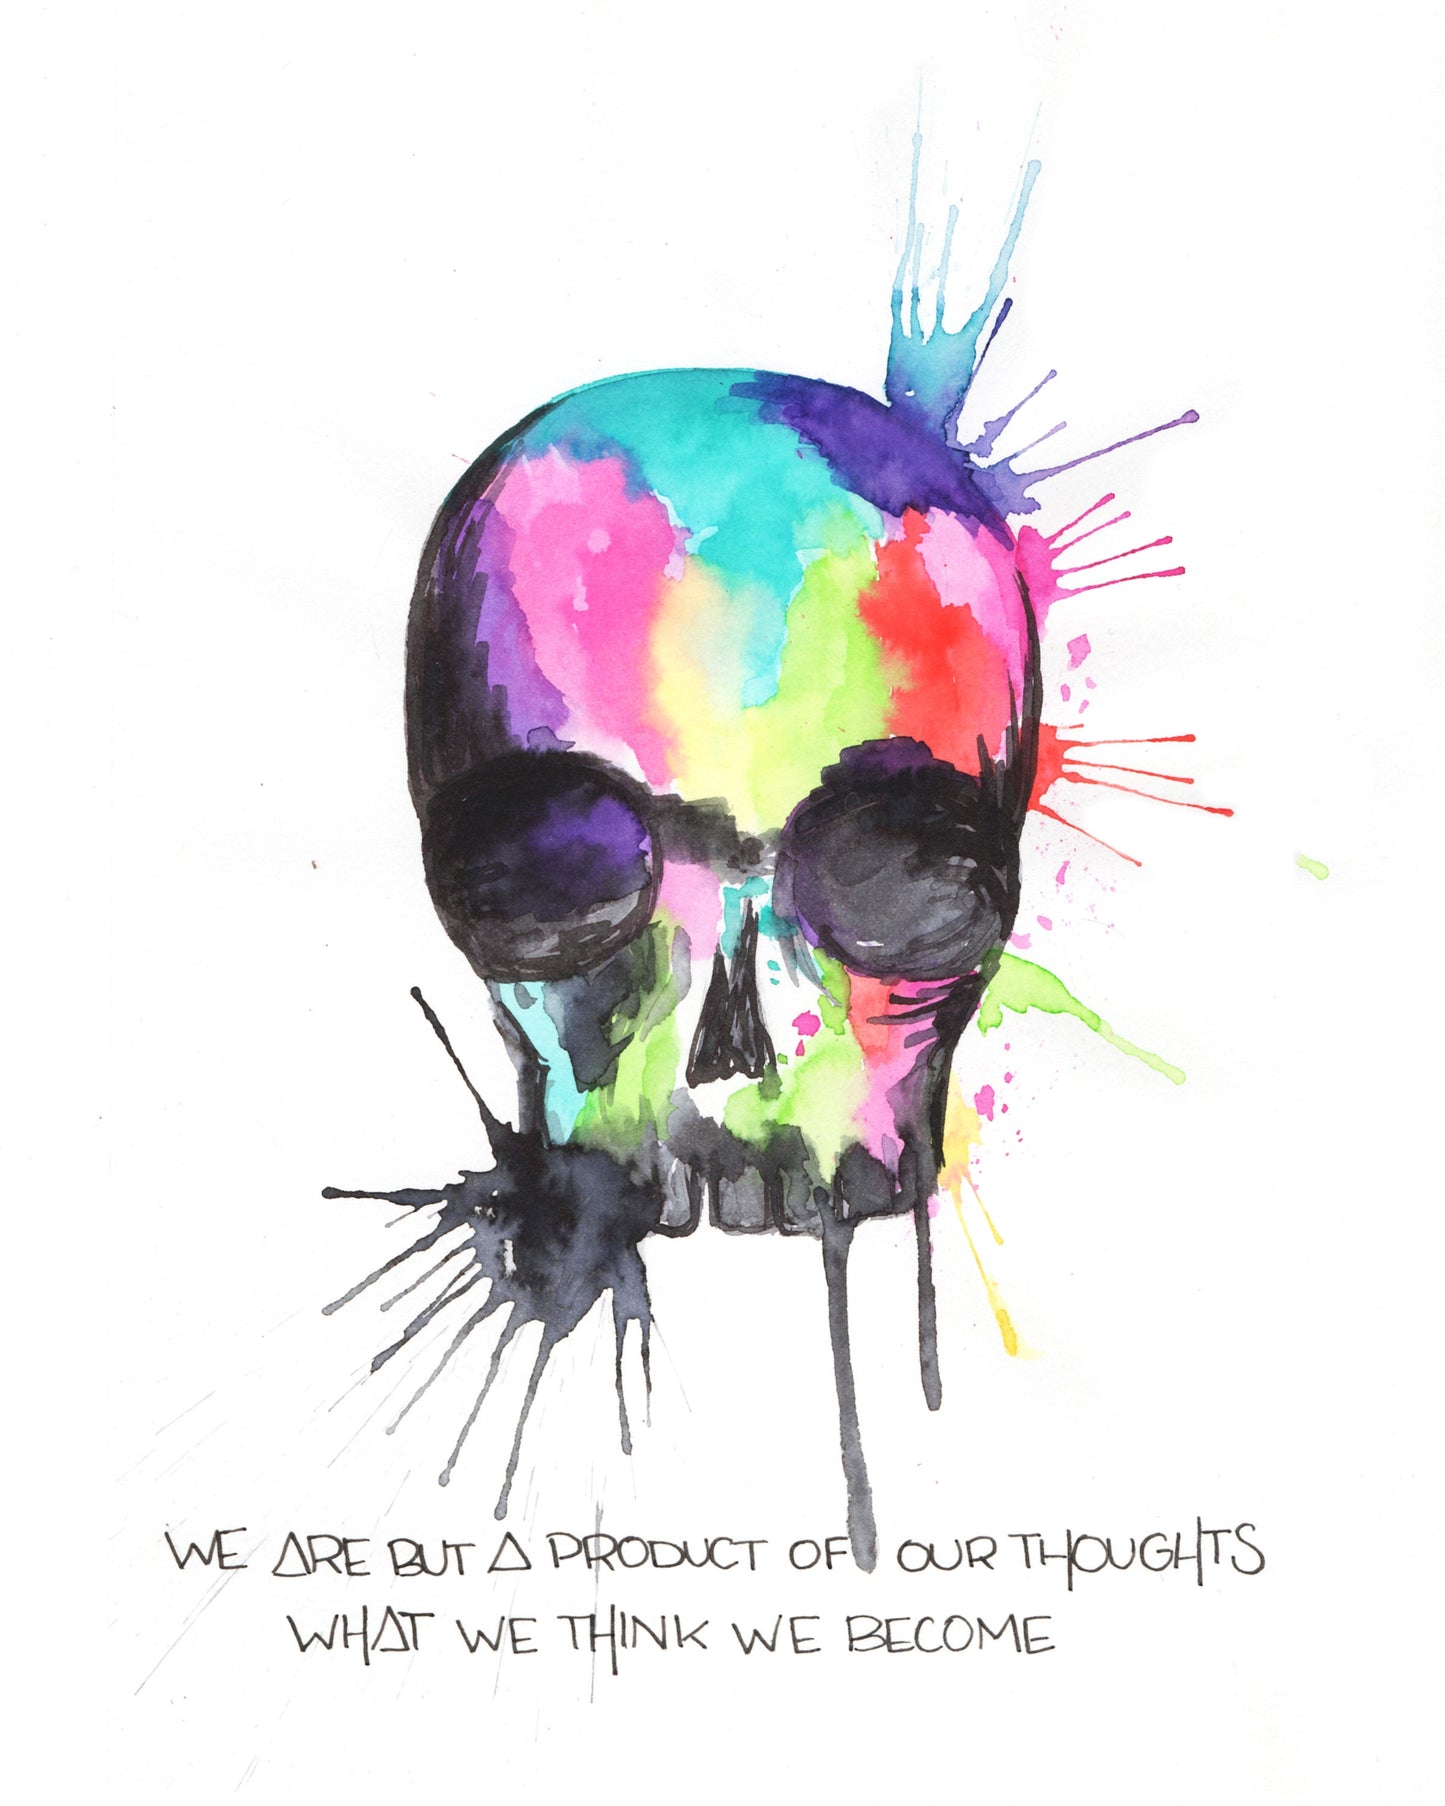 "What We Think We Become"